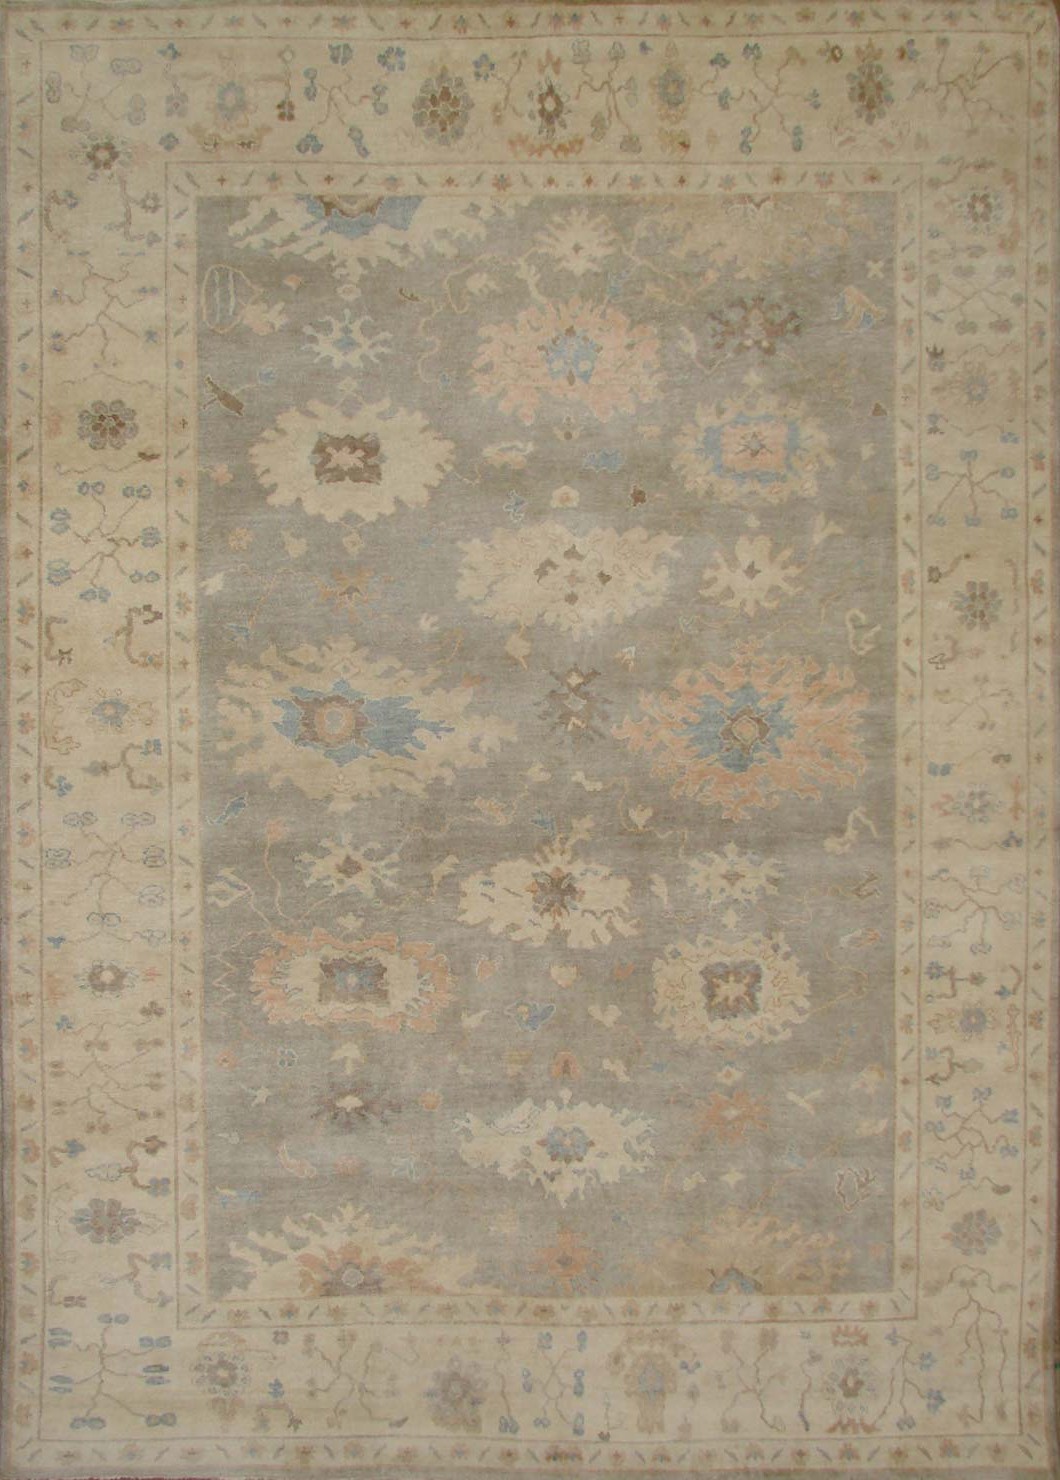 Buy P.KNOT ODR Exclusive Hand Knoted Oushak Rug at Oriental Designer Rugs